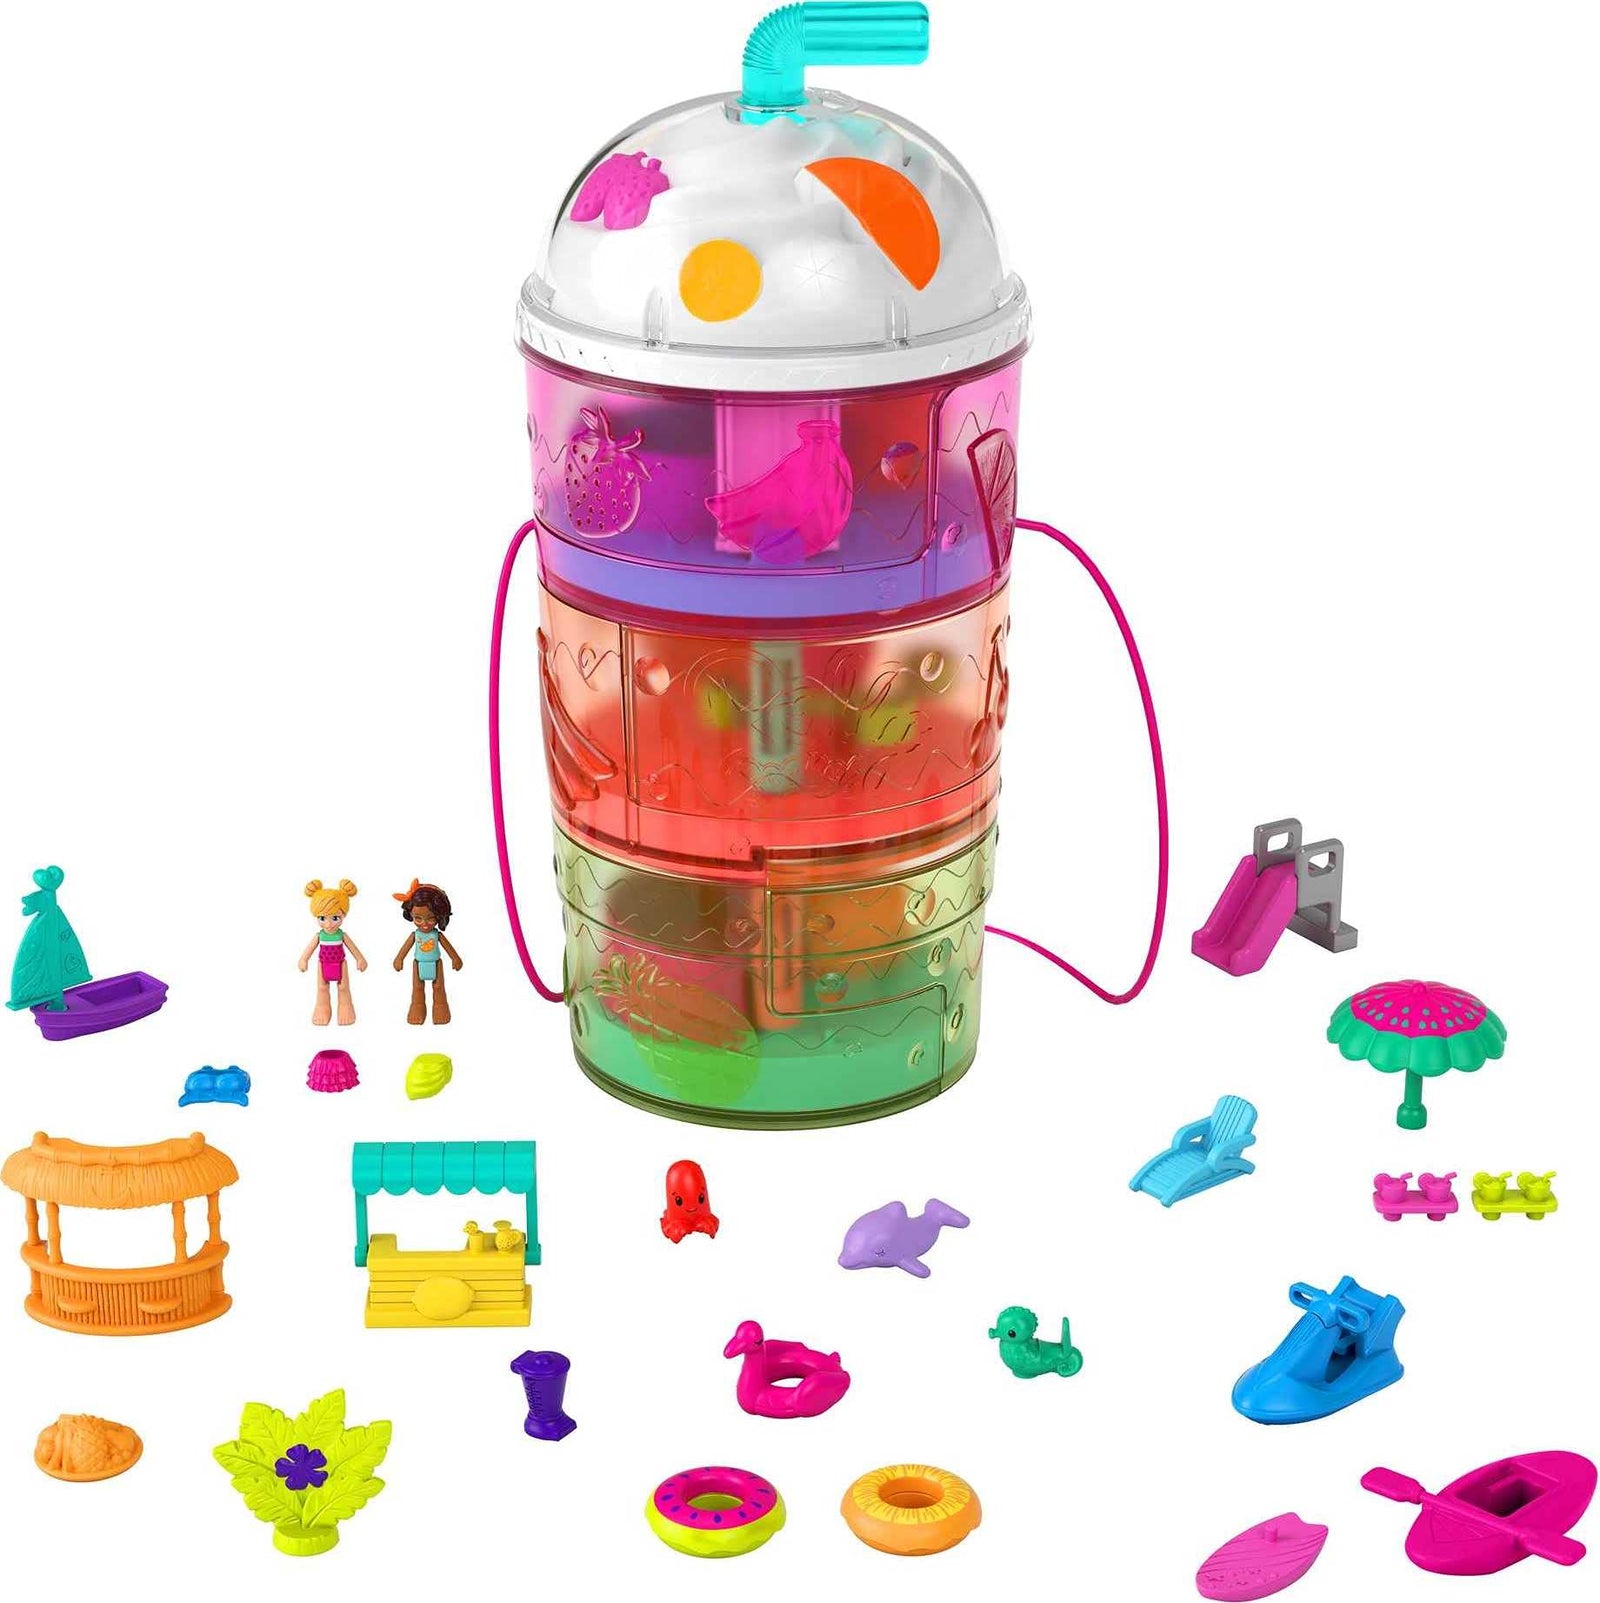 Polly Pocket Spin ‘n Surprise Compact Playset, Tropical Smoothie Shape, Waterpark Theme, 3 Floors, 25 Surprise Accessories Including Polly & Shani Dolls, Great Gift for Ages 4 Years Old & Up